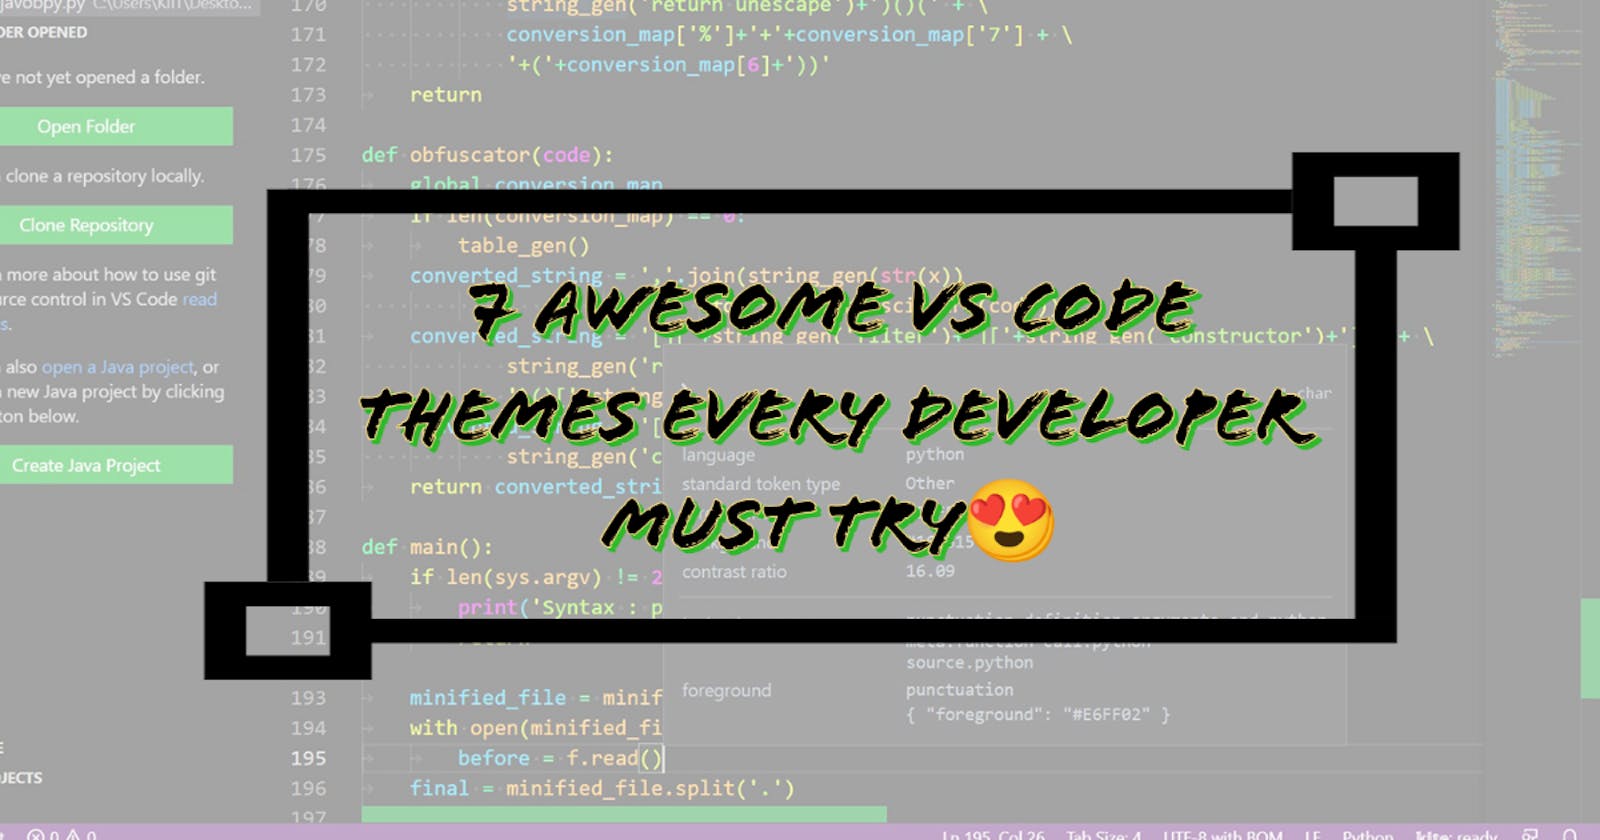 7 Awesome VS Code Themes Every Developer Must Try😍